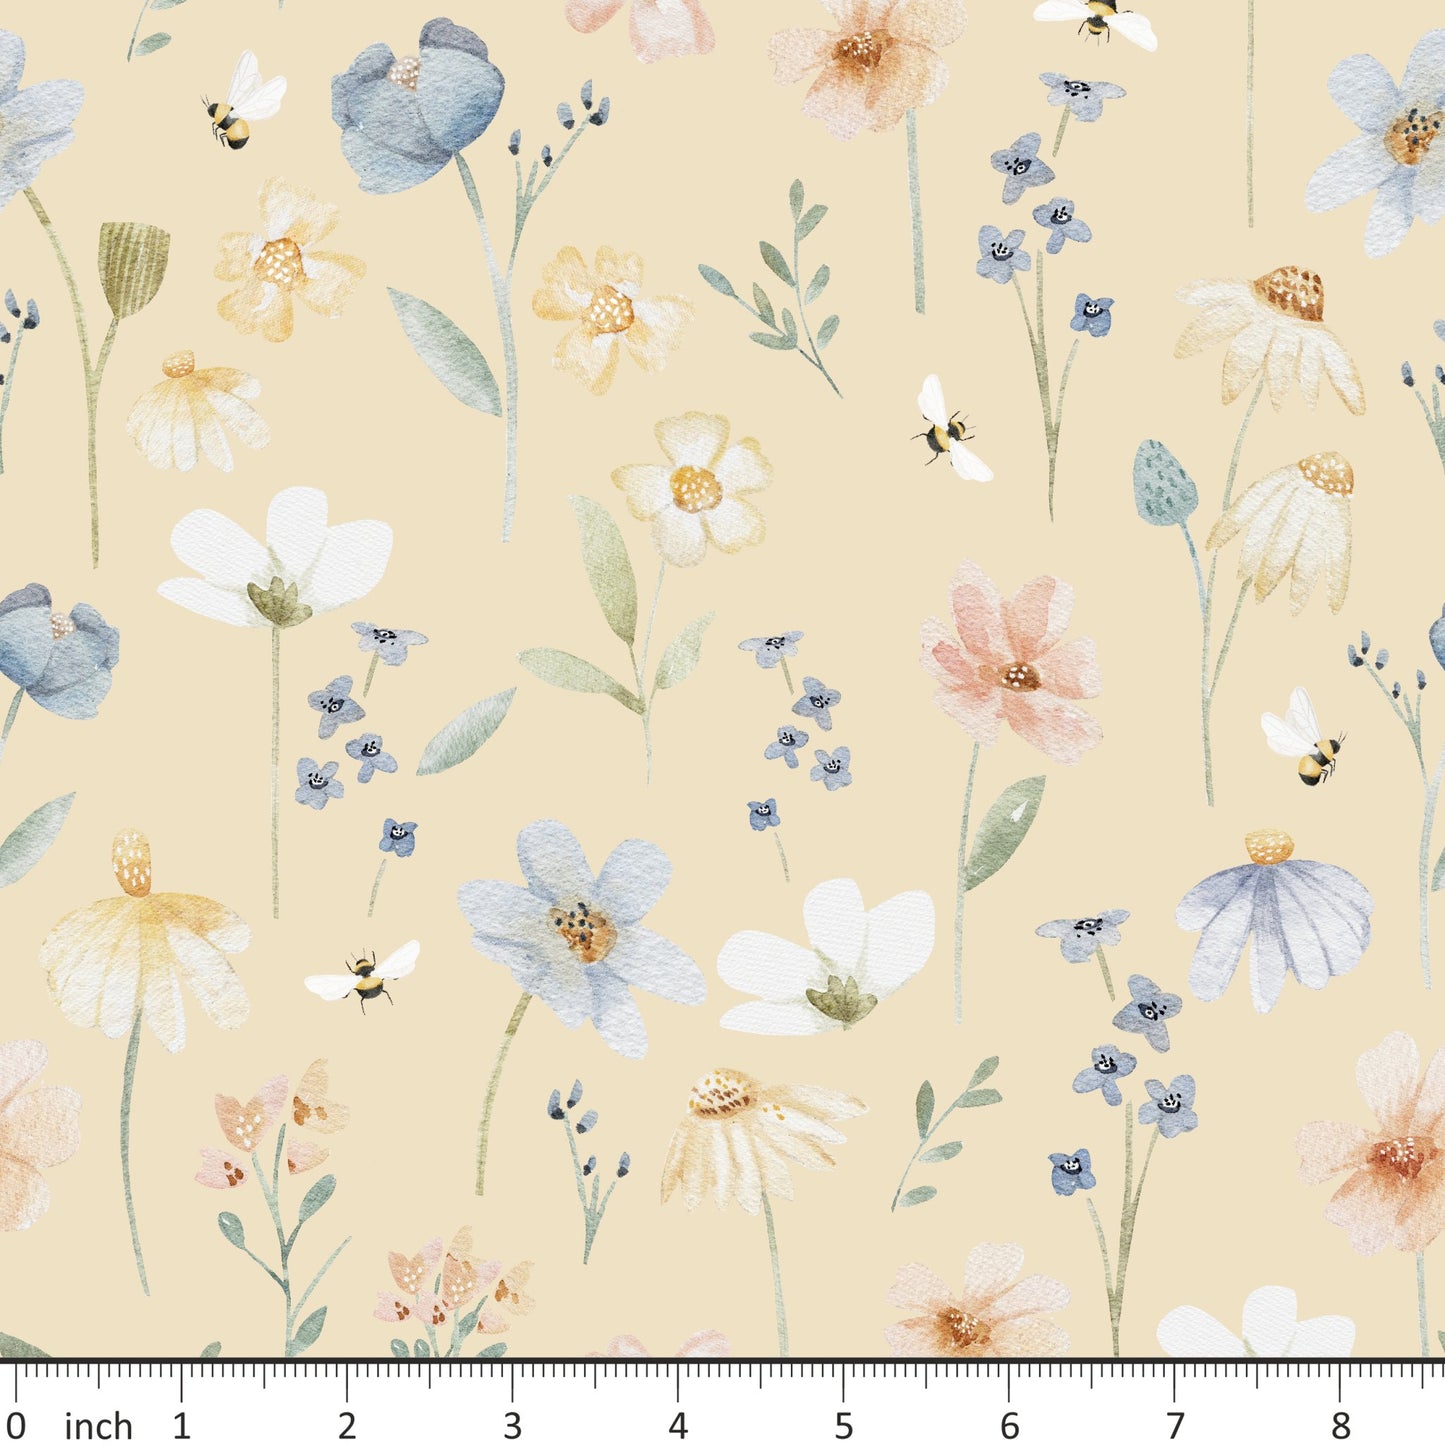 Lumelo and Ginger - Lana - Blume - Effi - on Chalk - Coordinating Panels - 58x36 inches - Little Rhody Sewing Co.